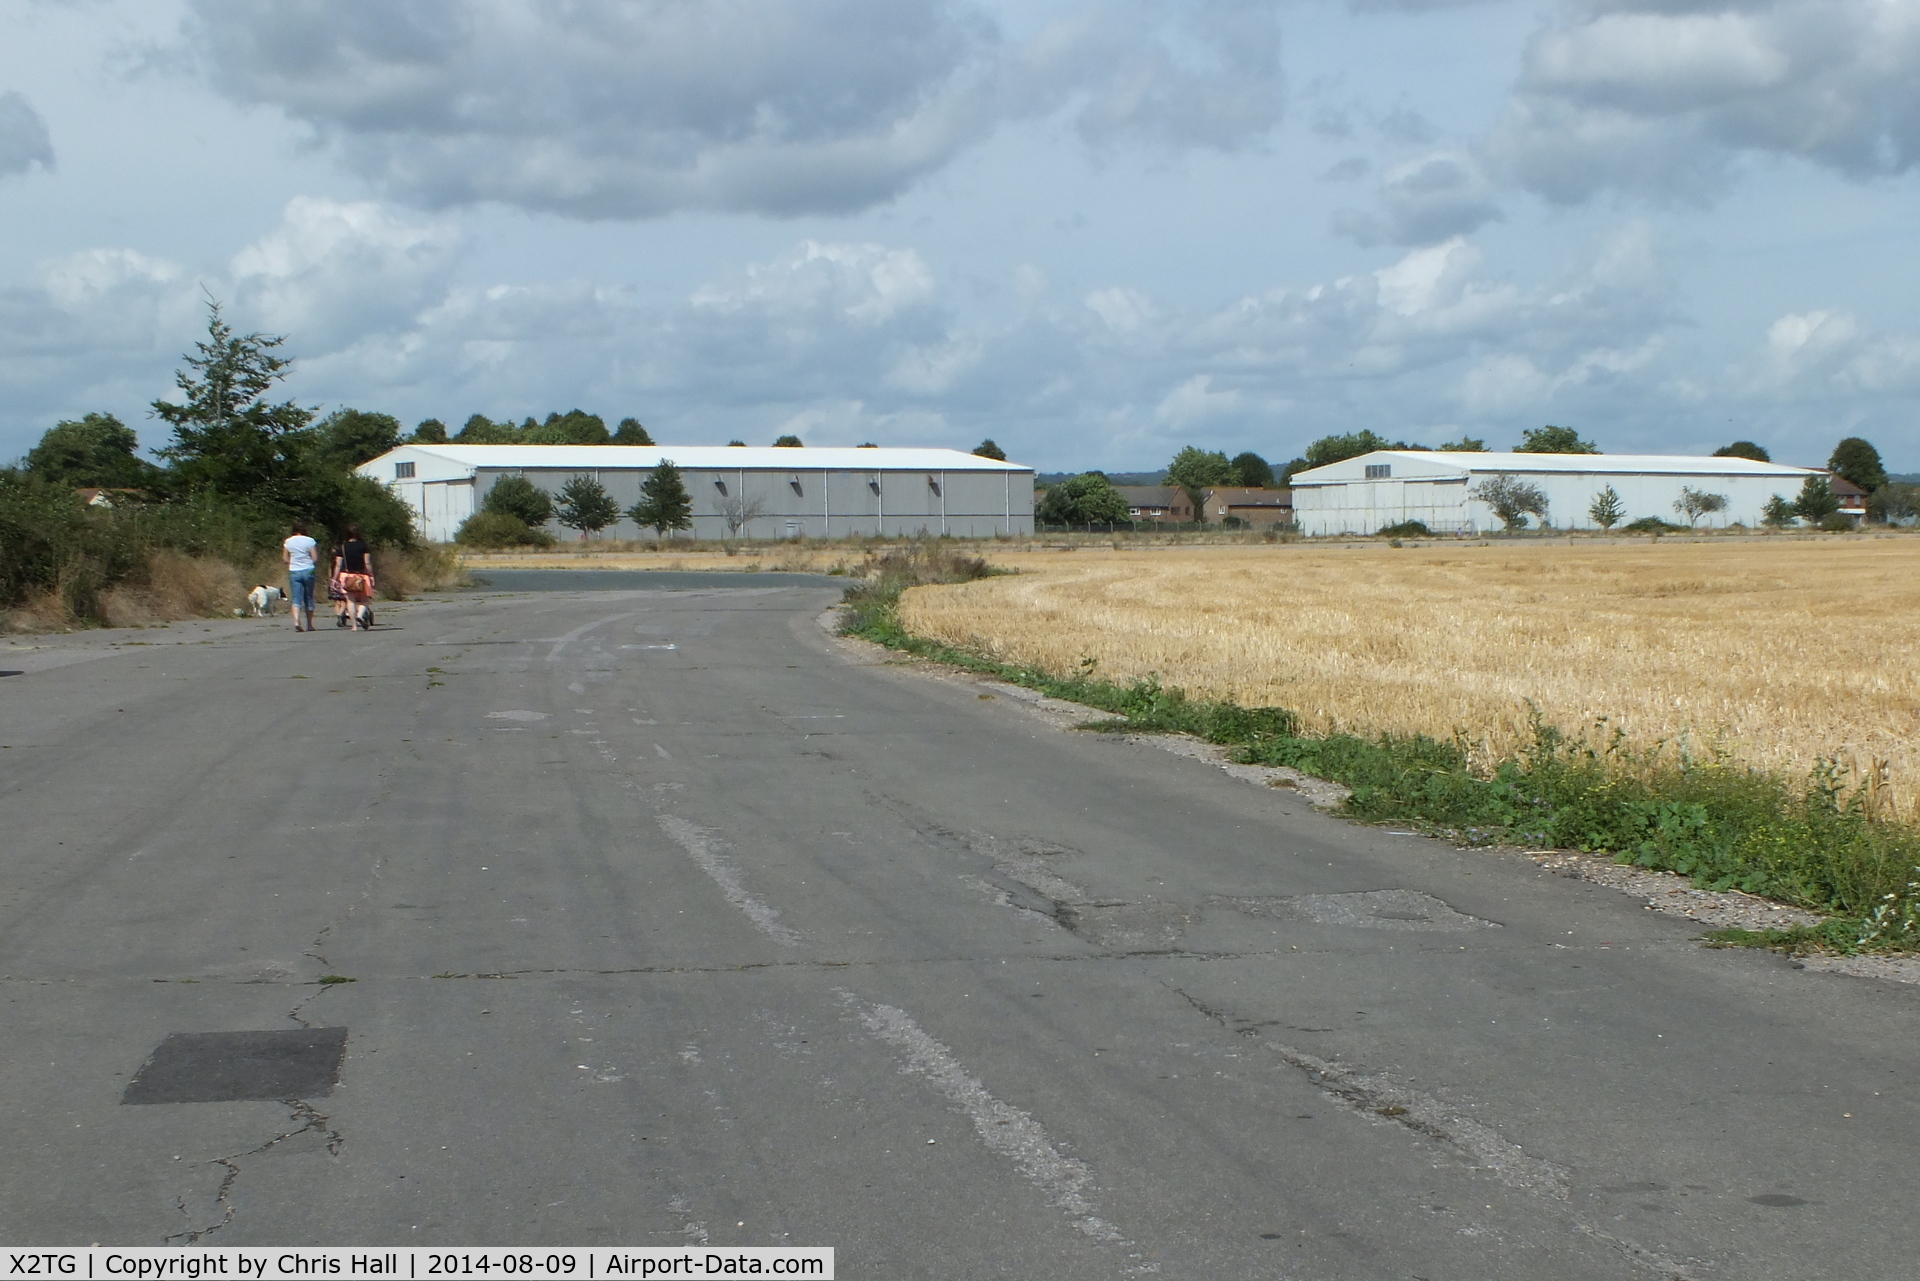 X2TG Airport - section of the perimiter track and hangars at the former RAF Tangmere